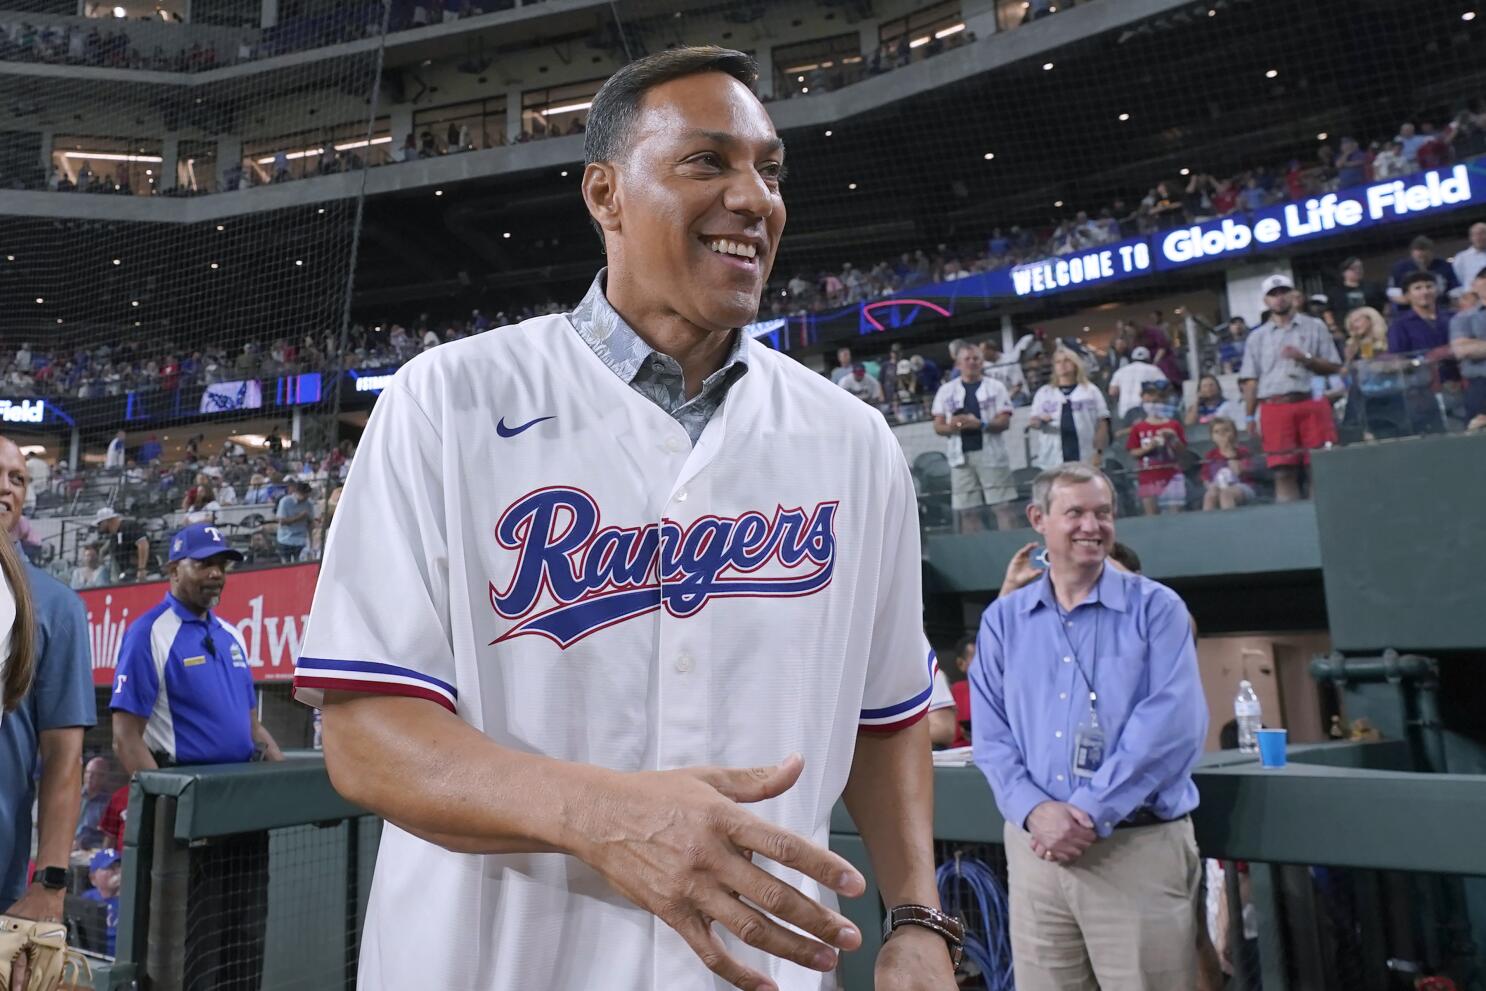 2-time AL MVP Juan González, one of baseball's best sluggers in the '90s,  honored by Texas Rangers - The San Diego Union-Tribune